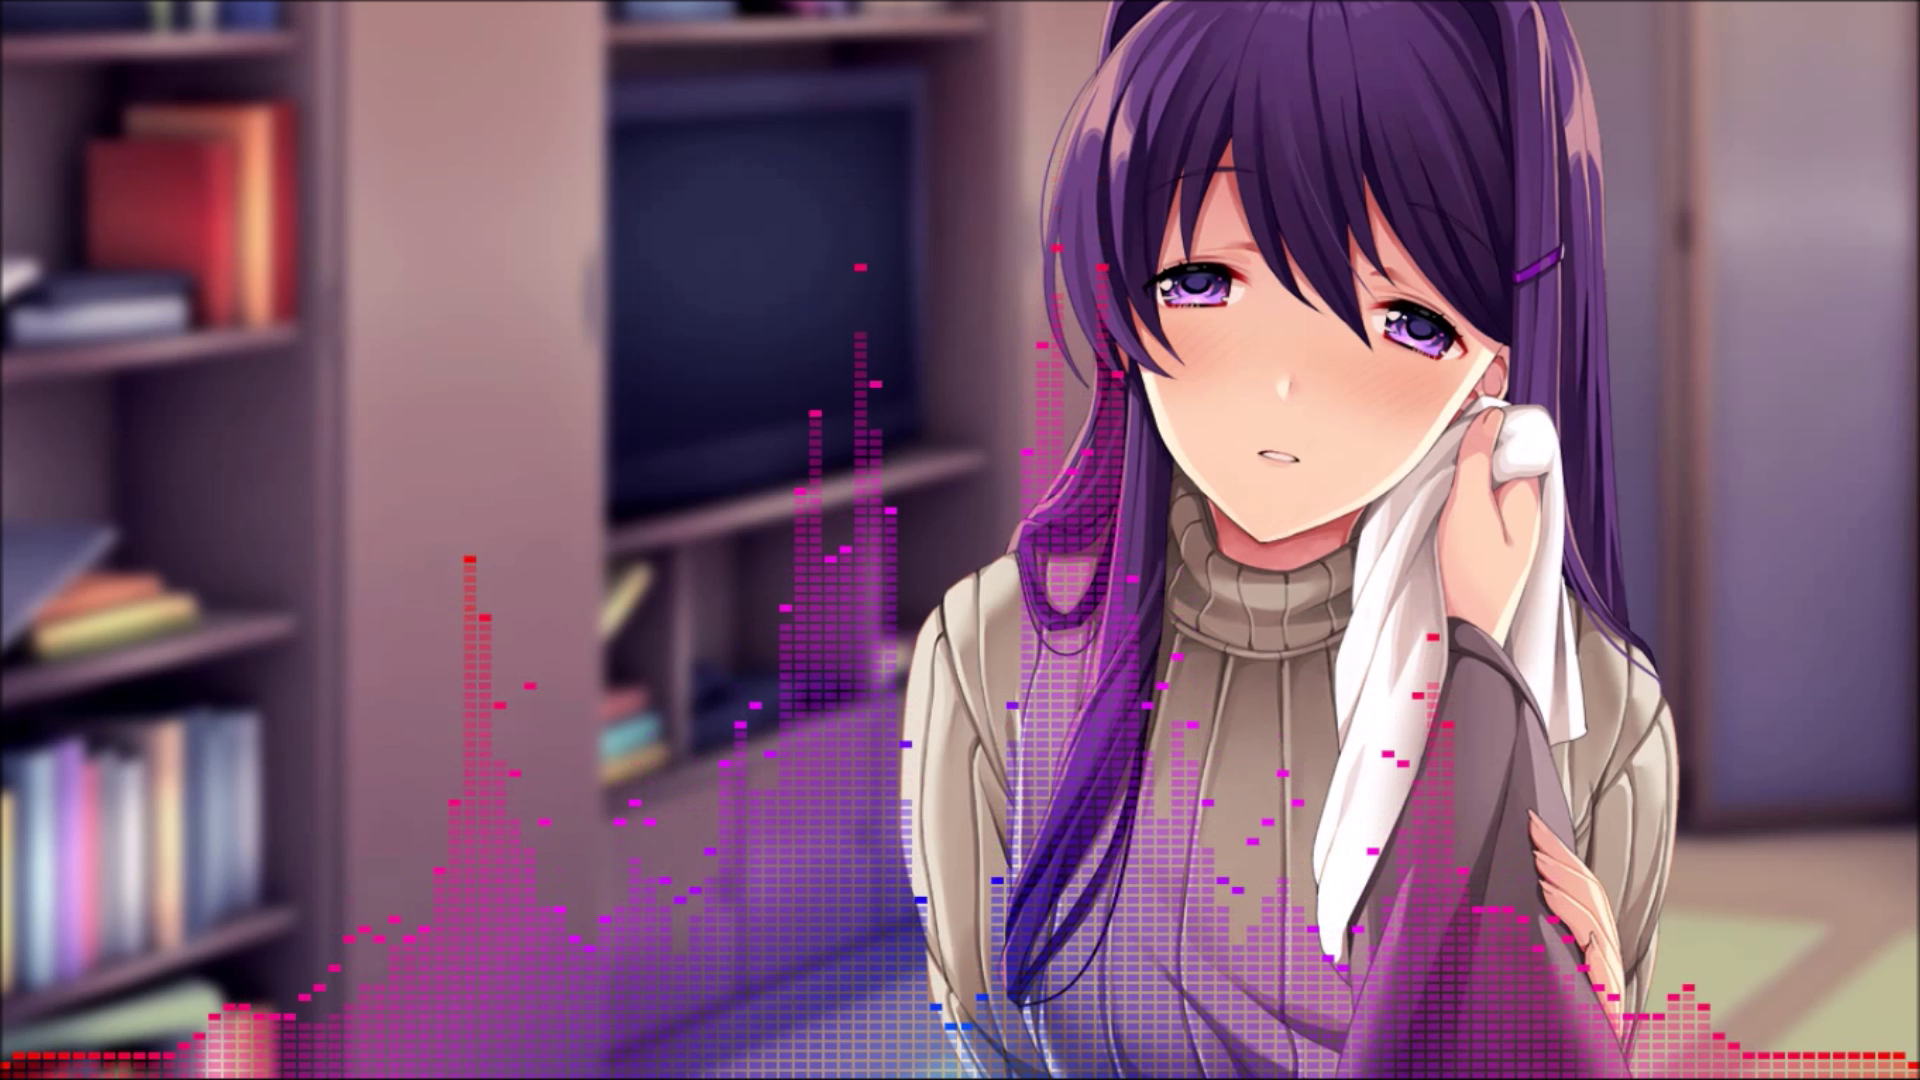 how to work just yuri 1.15